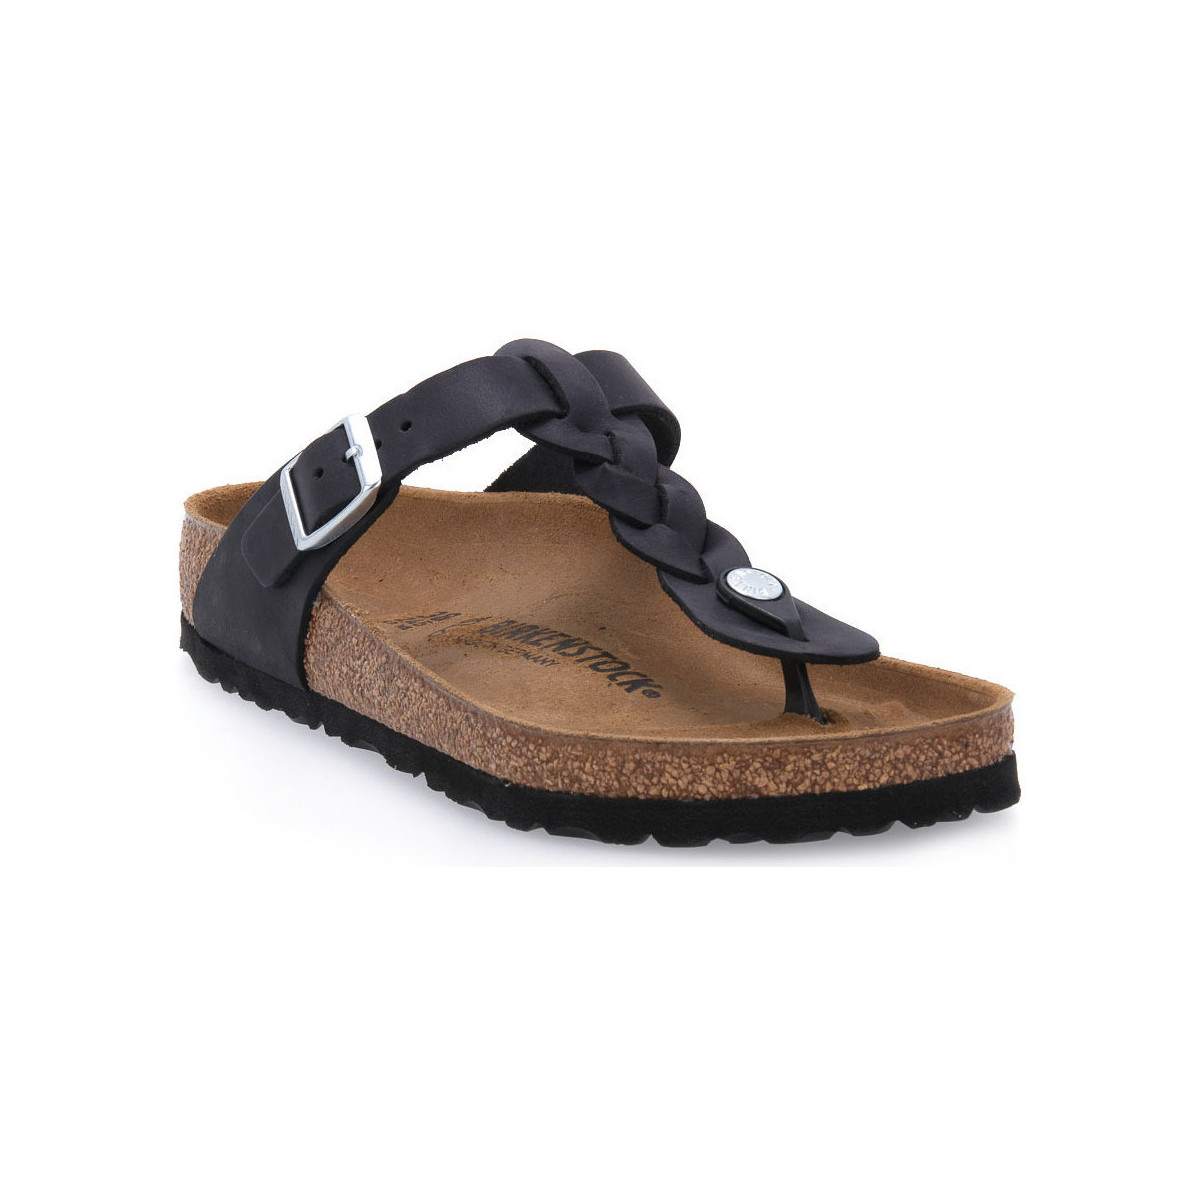 Zapatos Mujer Zuecos (Mules) Birkenstock GIZEH BRAIDED BLK OILED CALZ S Negro